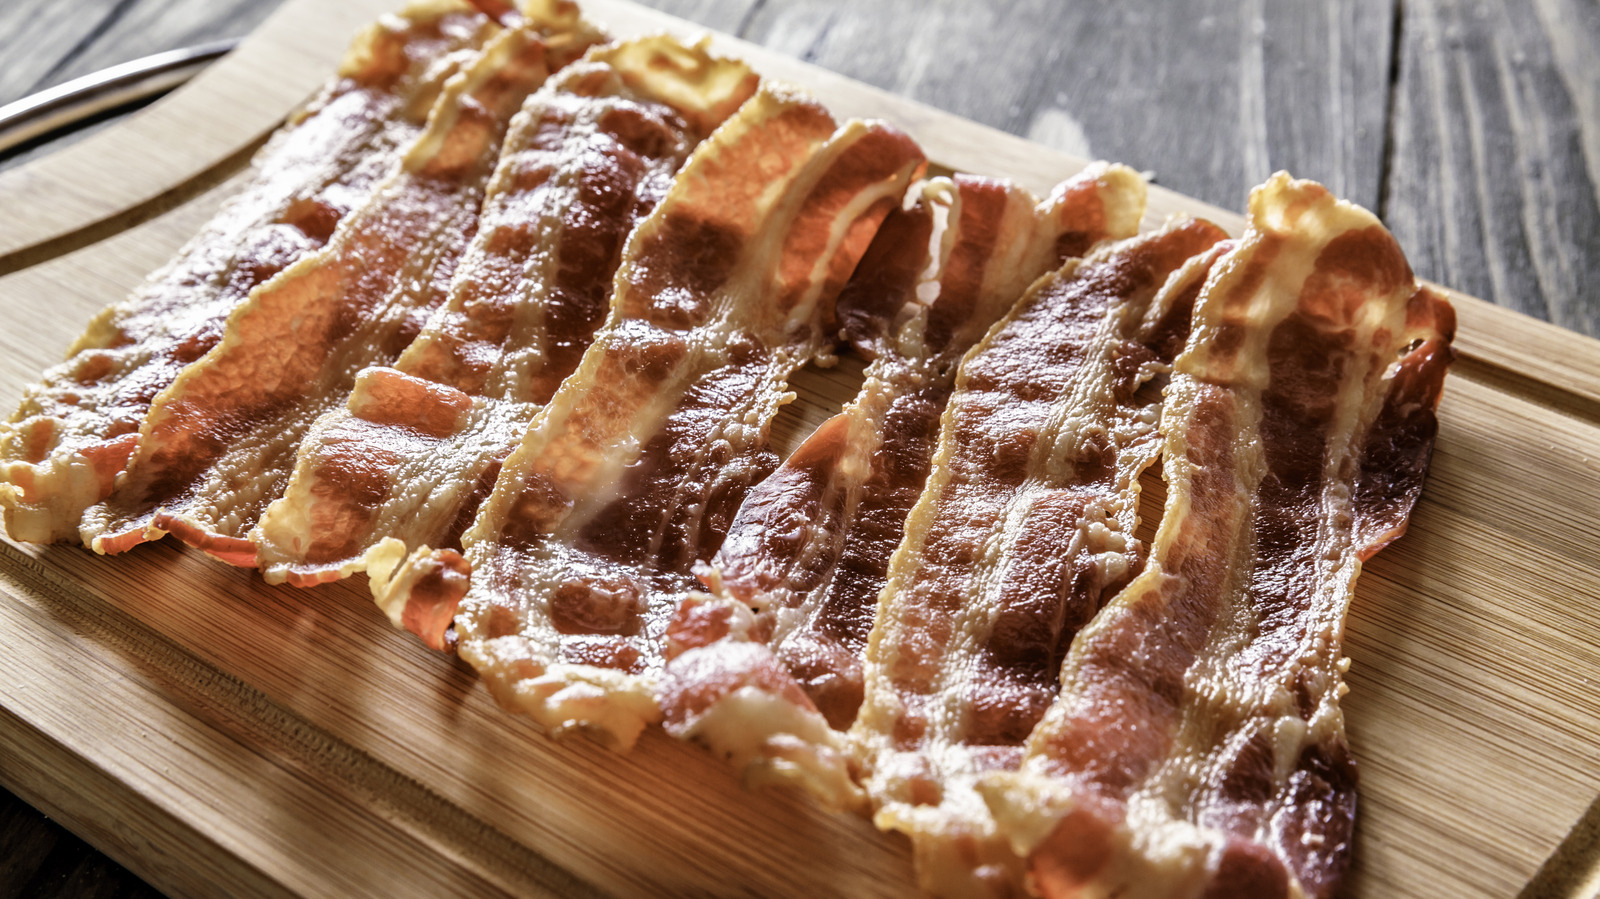 https://www.foodrepublic.com/img/gallery/cover-your-bacon-in-water-for-texture-perfection/l-intro-1691361747.jpg